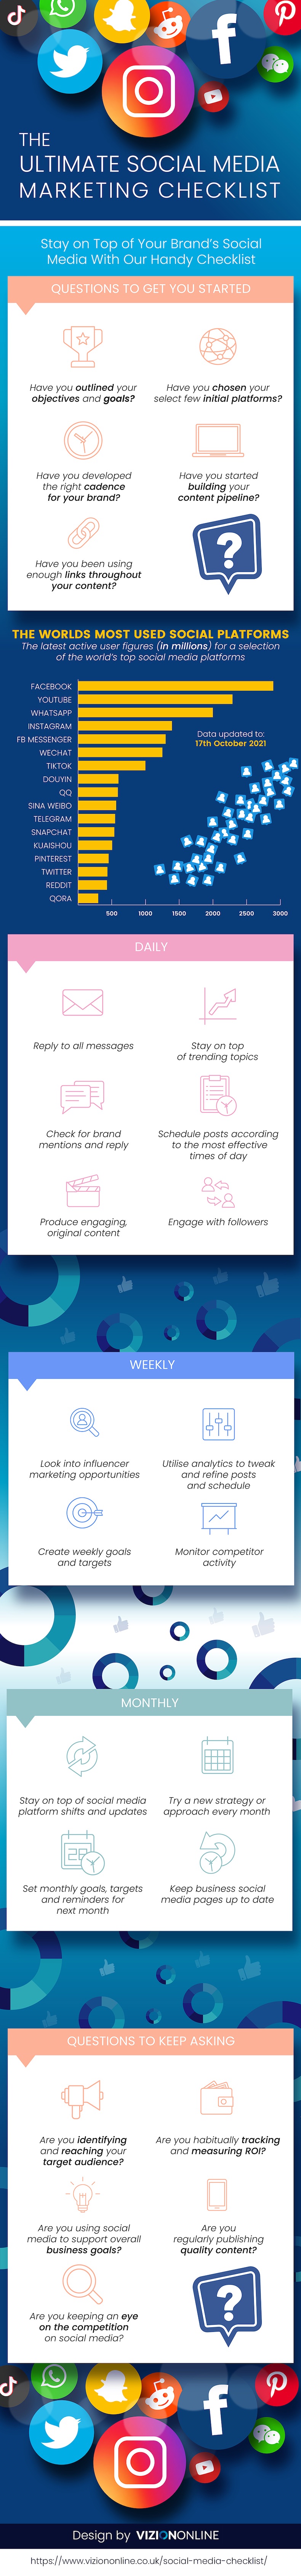 The ultimate social media marketing checklist infographic